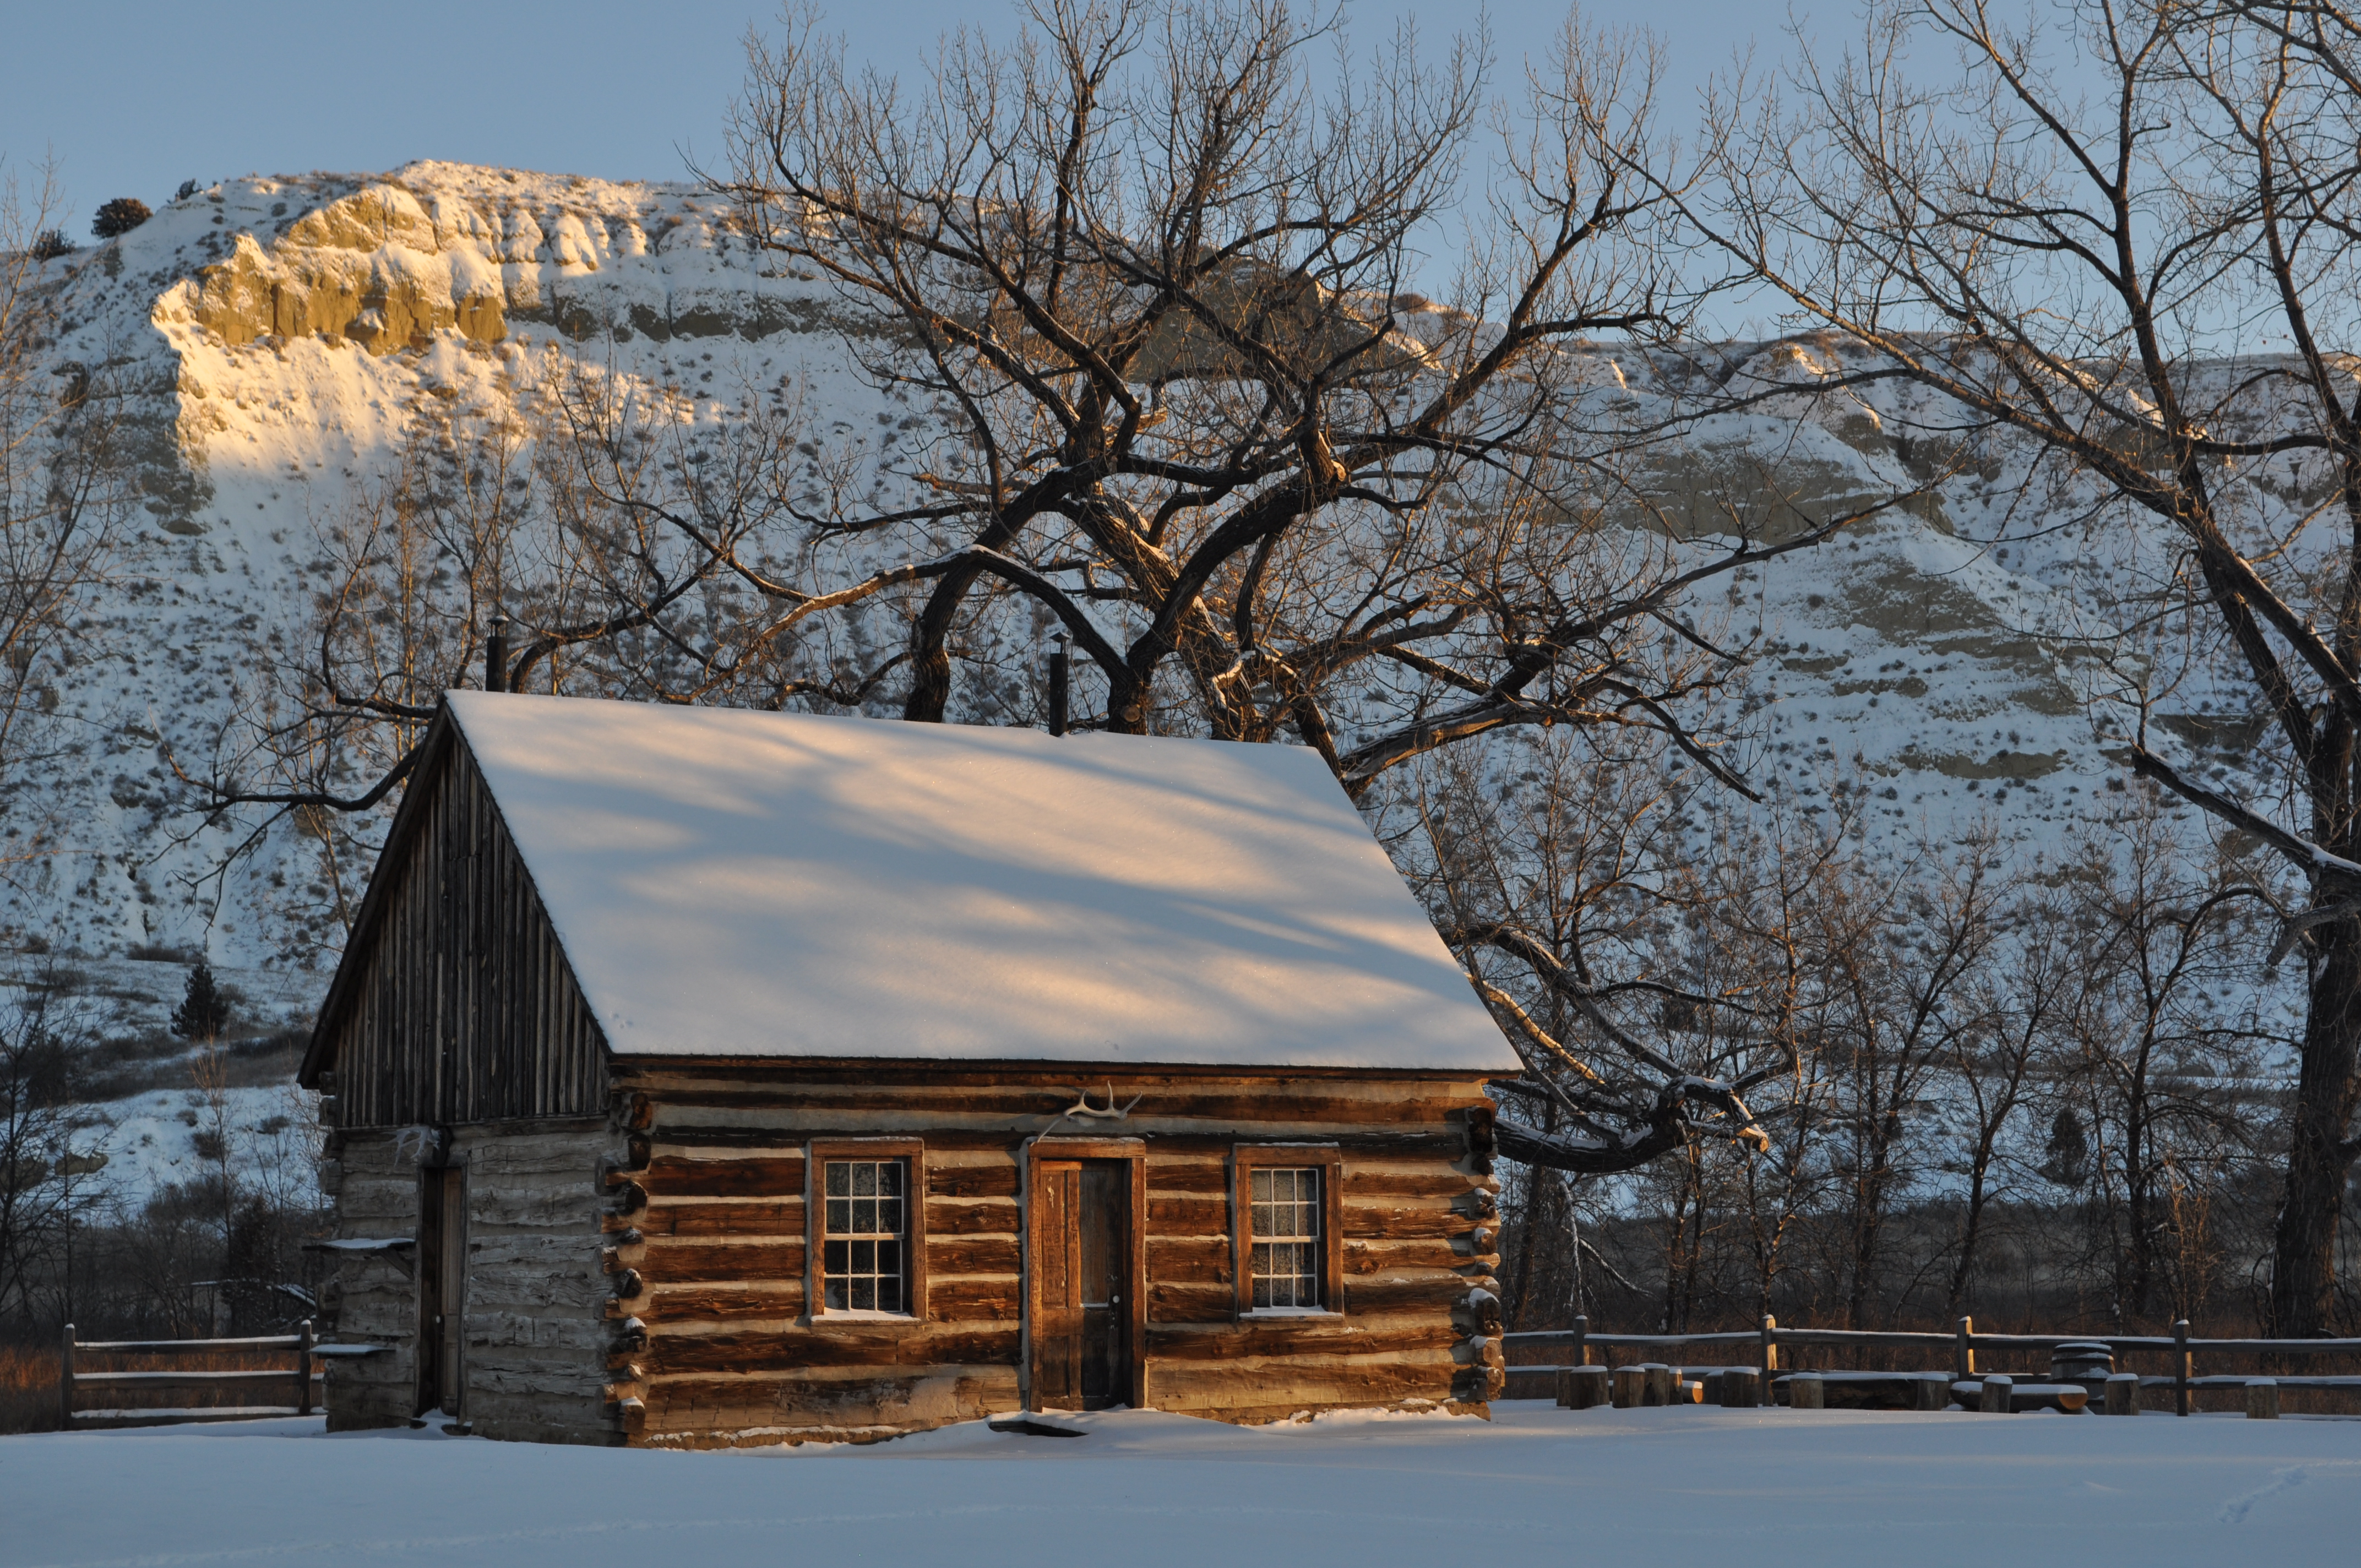 The rising sun casts light on Roosevelt's snow-covered cabin.